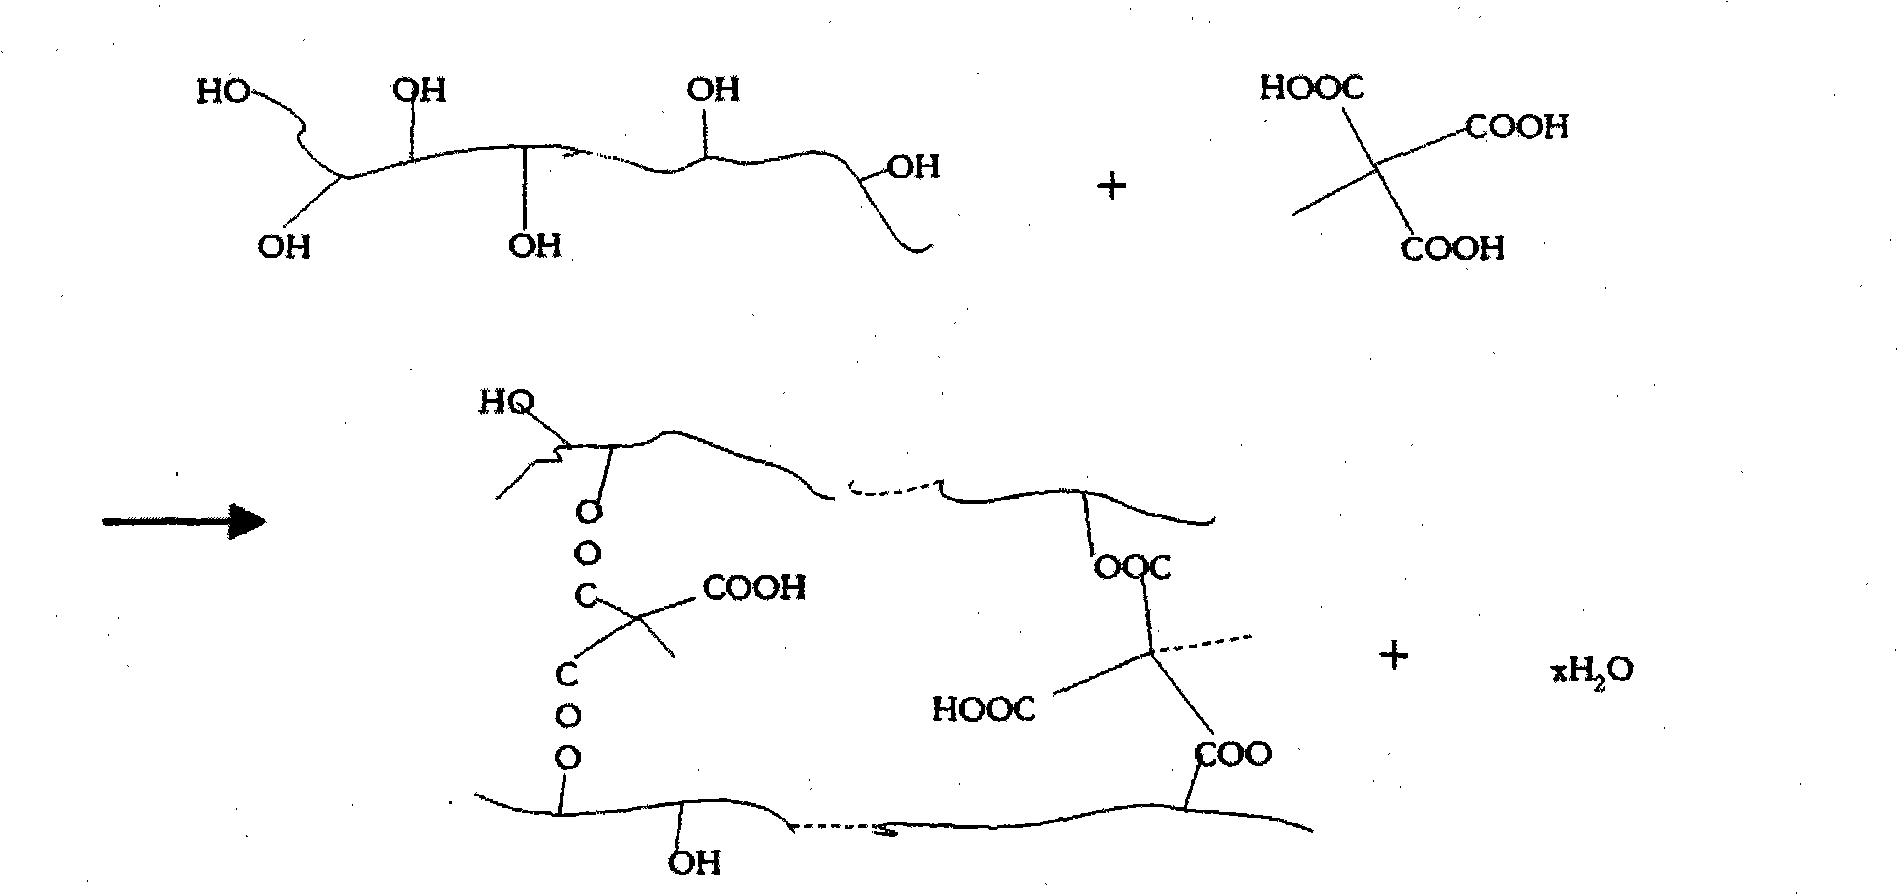 Polymeric composition for cellulosic materials binding and modification